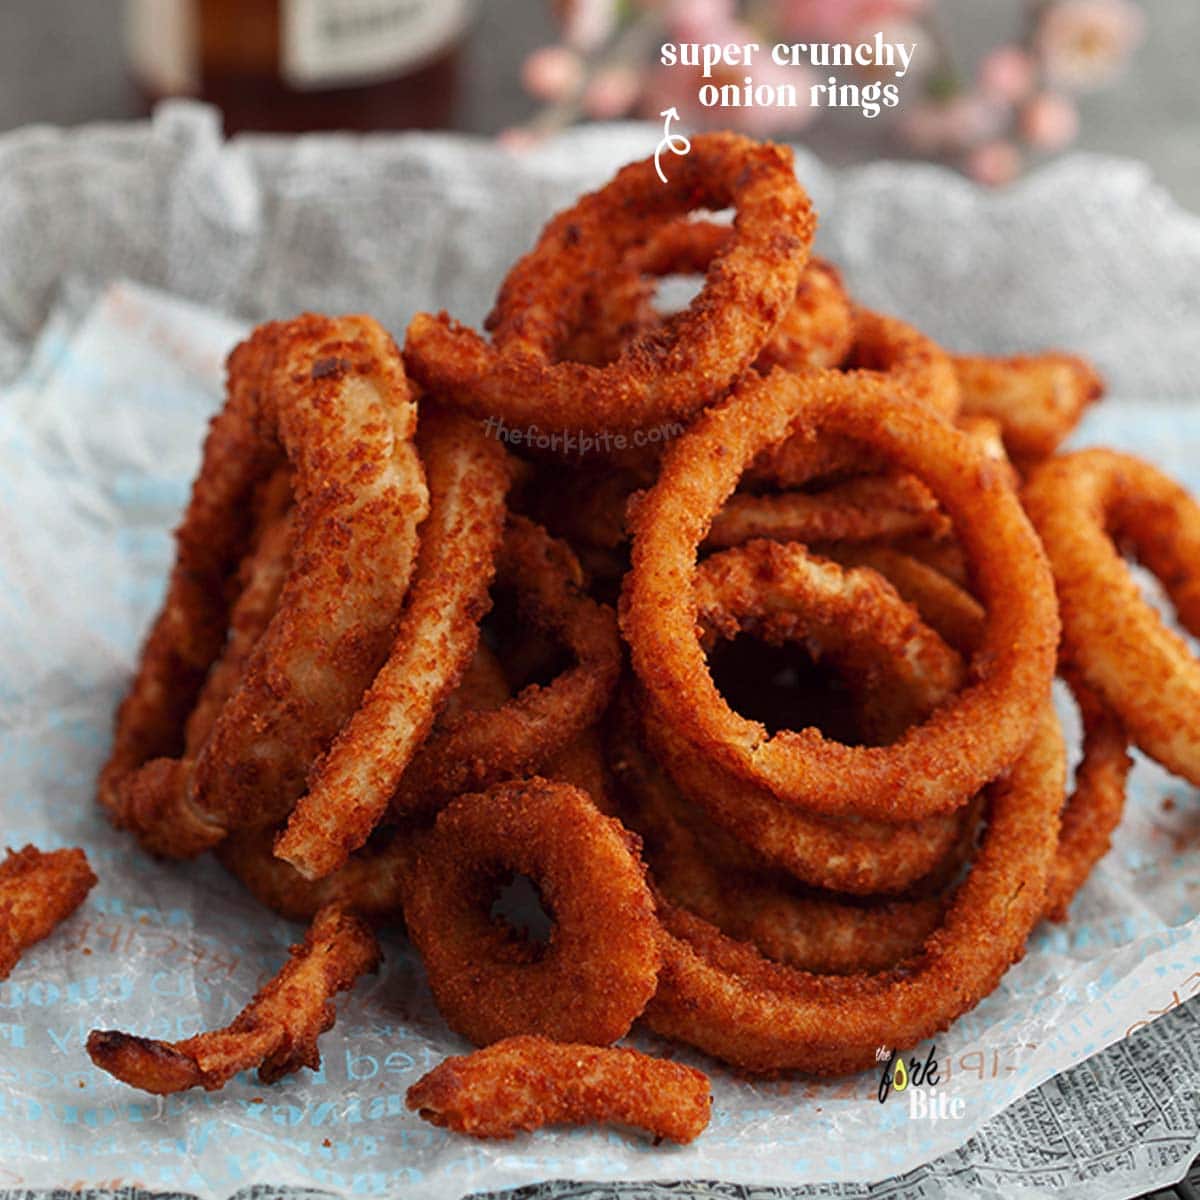 As a rough guide, it takes about 5 to 6 minutes to cook frozen onion rings in air fryer. But it is always recommended that you take note of the manufacturer's instructions.